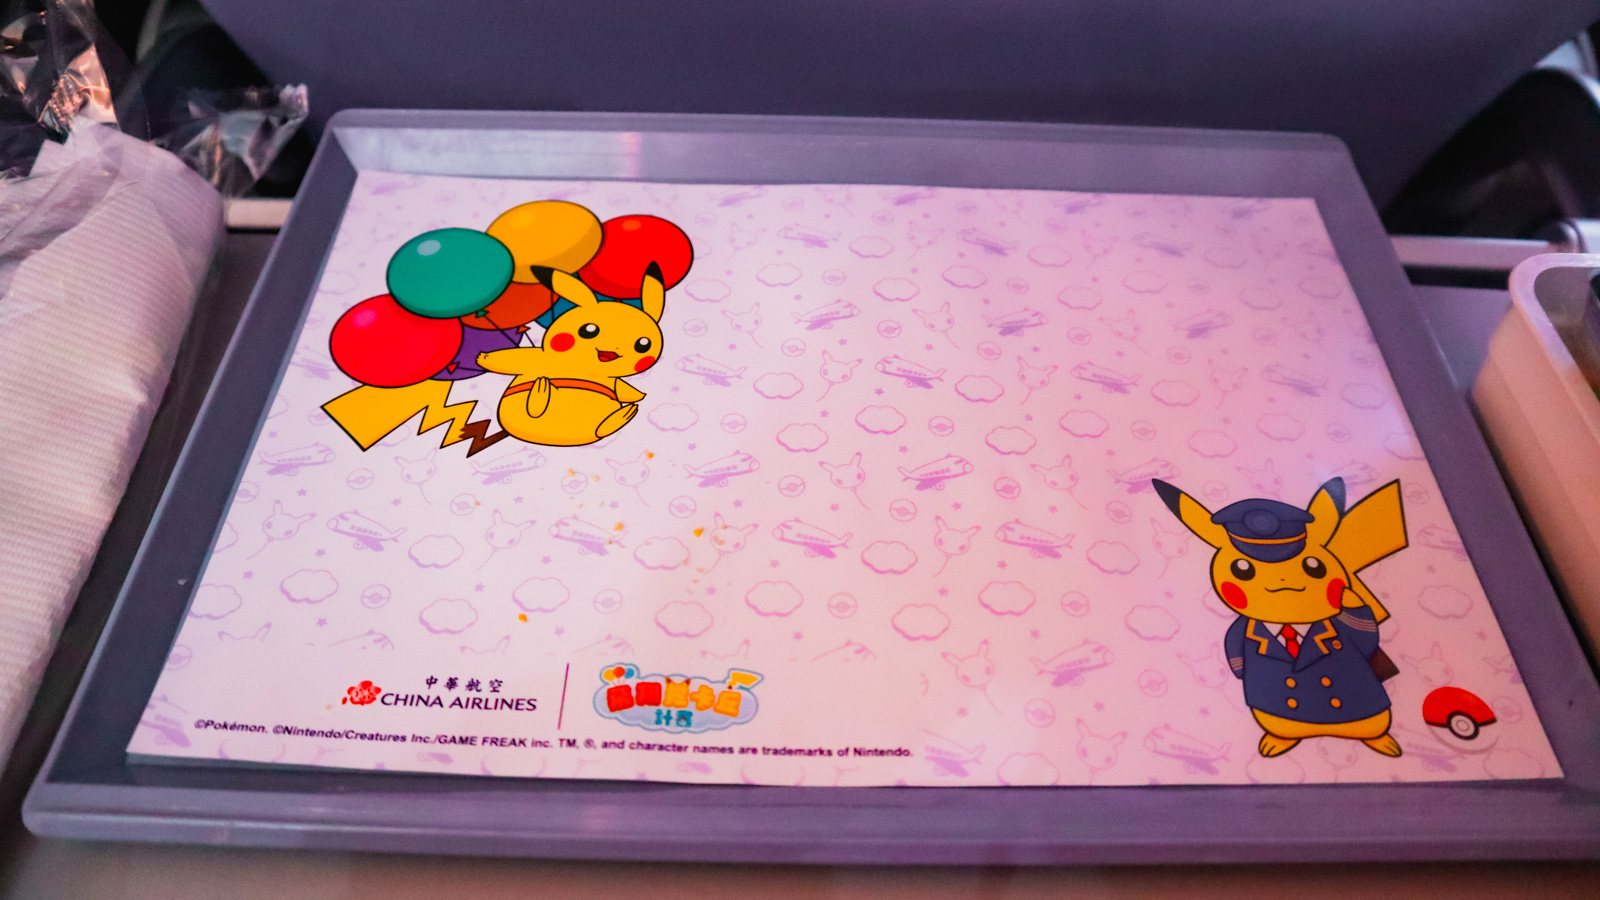 Meal tray on China Airlines Pokemon plane